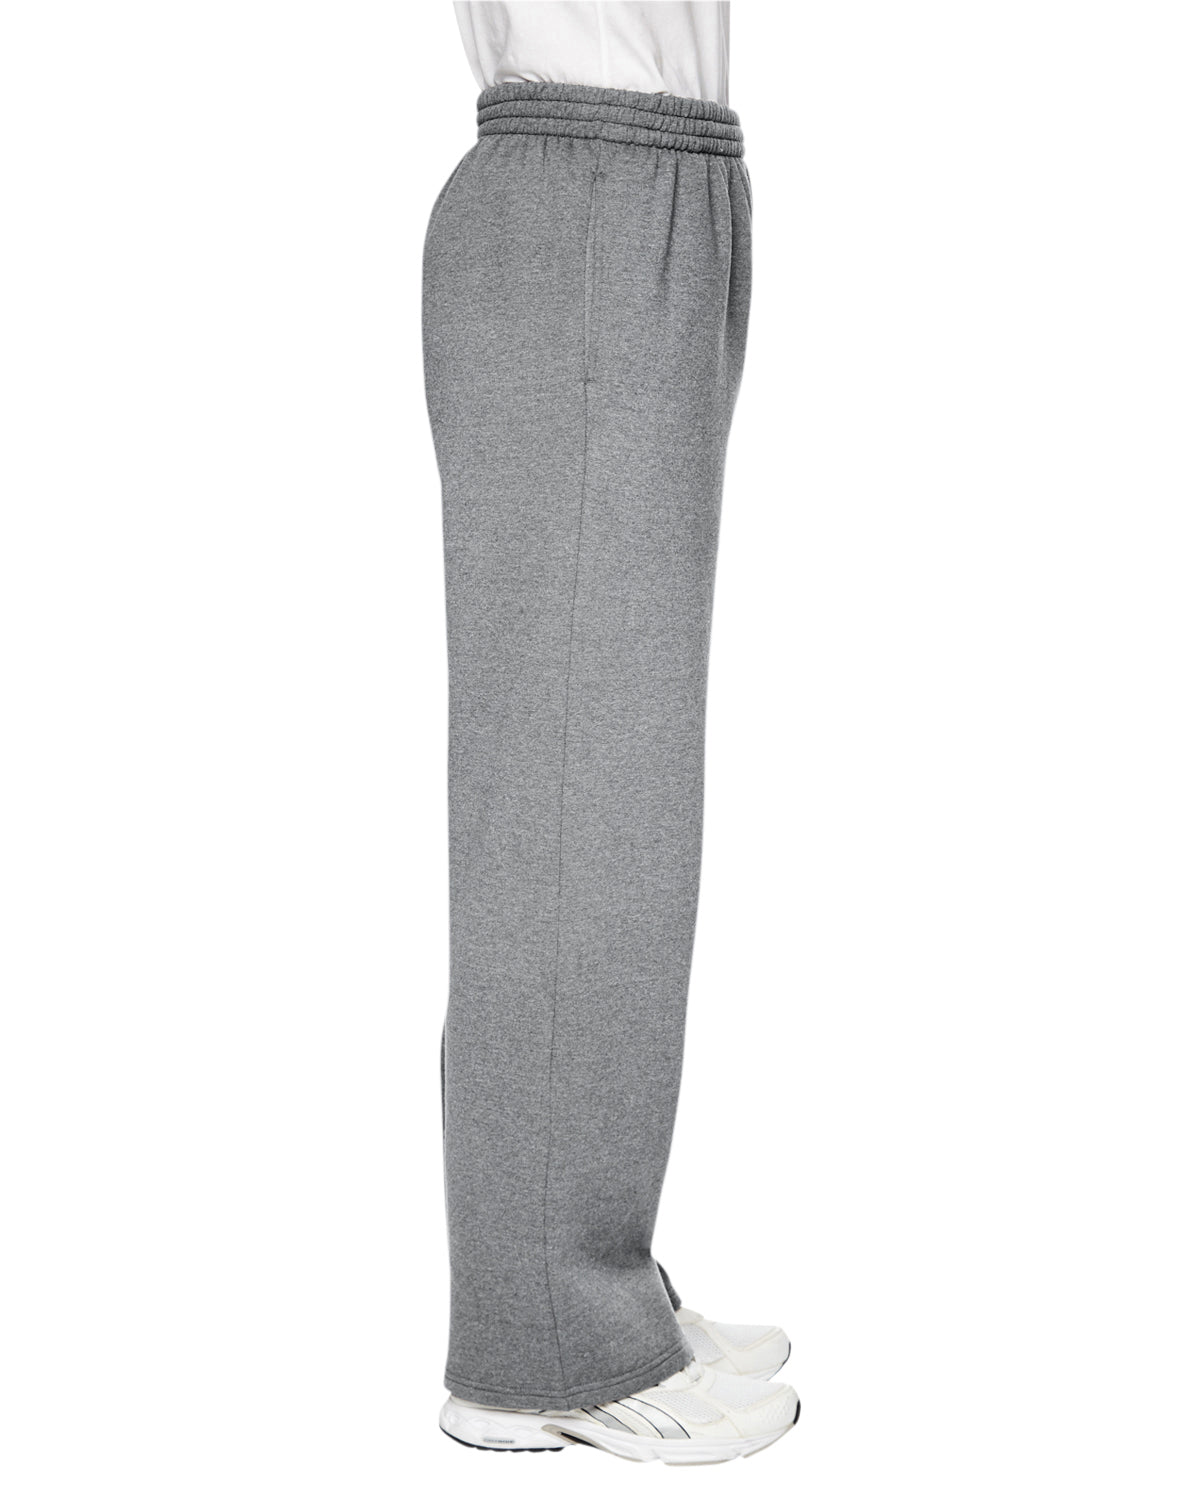 Open Bottom Sweatpants  Cabot Business Forms and Promotions